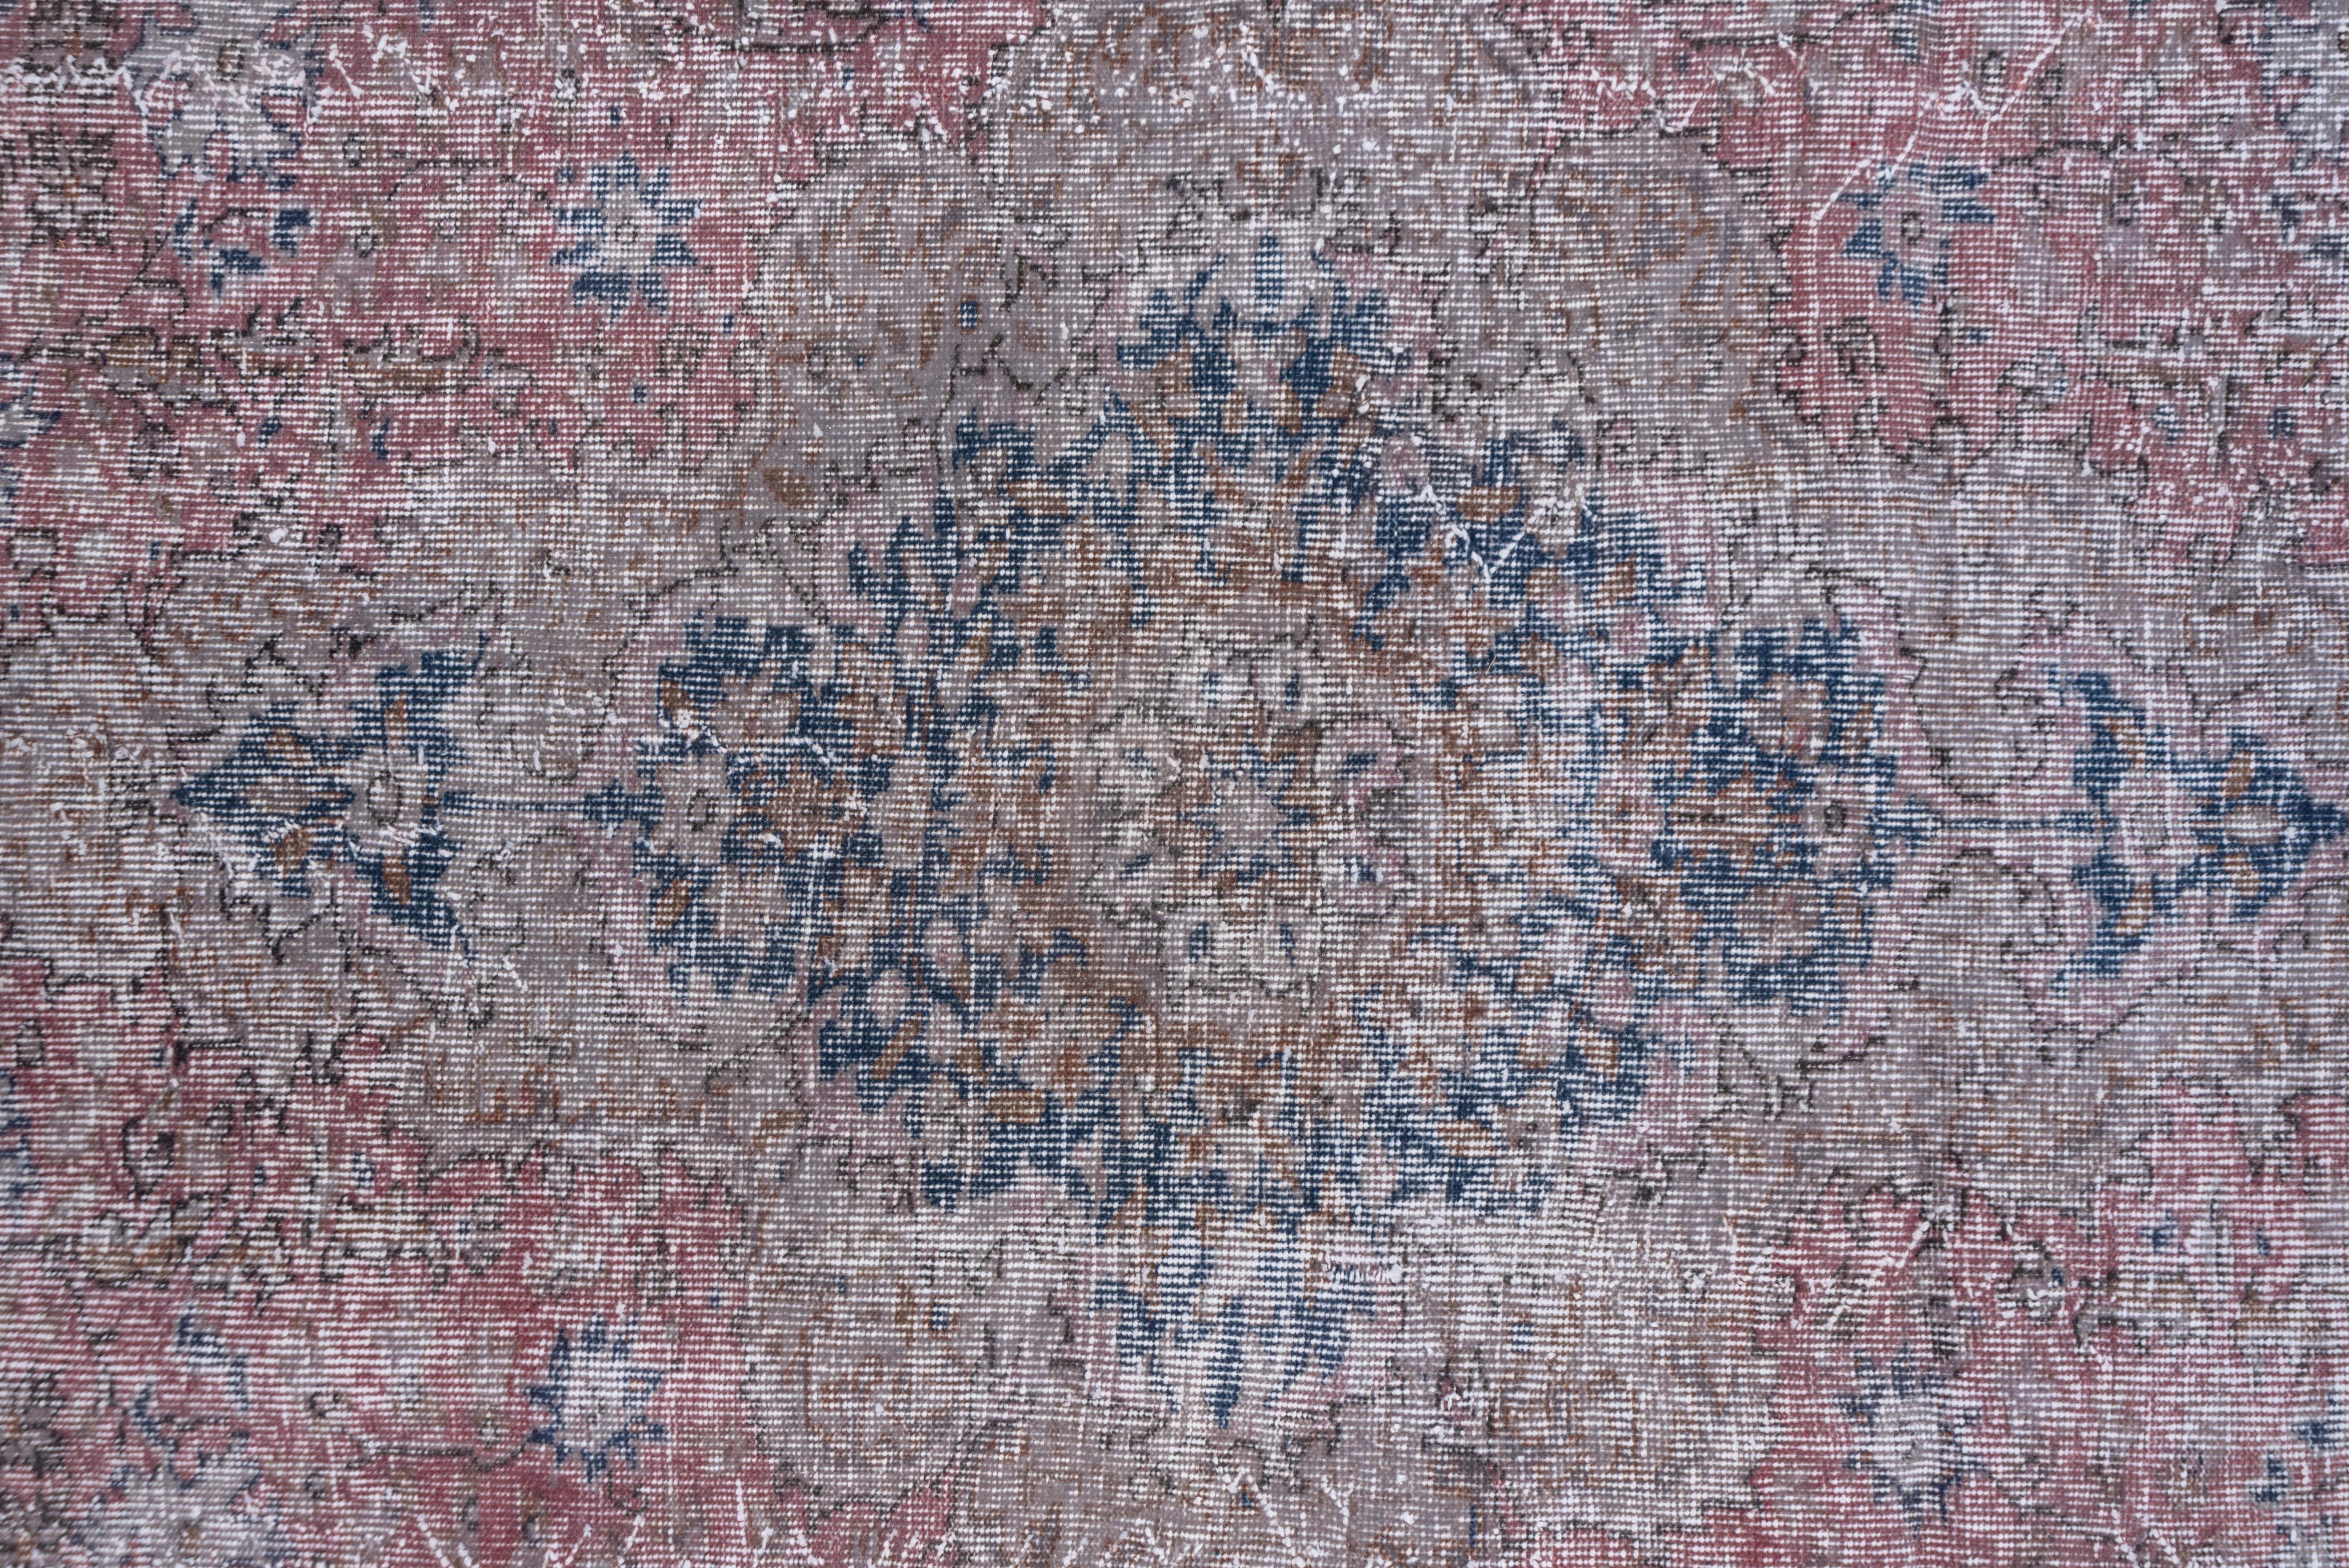 Turkish Dyed Sparta Rug in Smoke Purple - Washed Effect - 1940 In Good Condition For Sale In New York, NY